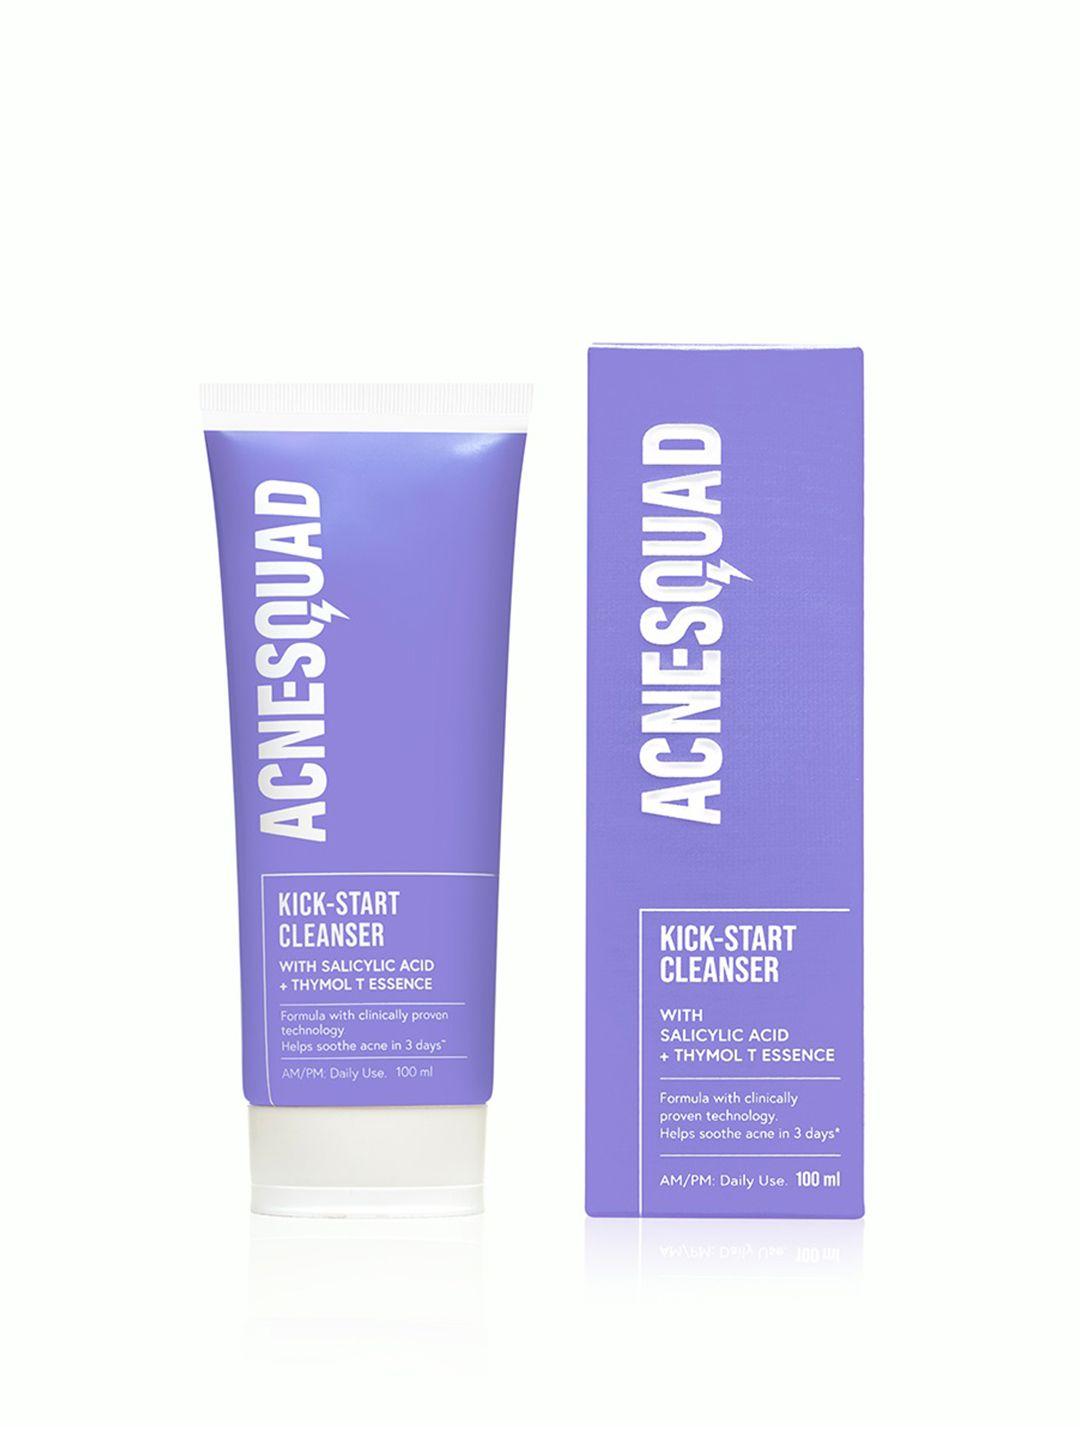 acne squad kick-start face cleanser with salicylic acid & thymol t essence - 100 ml